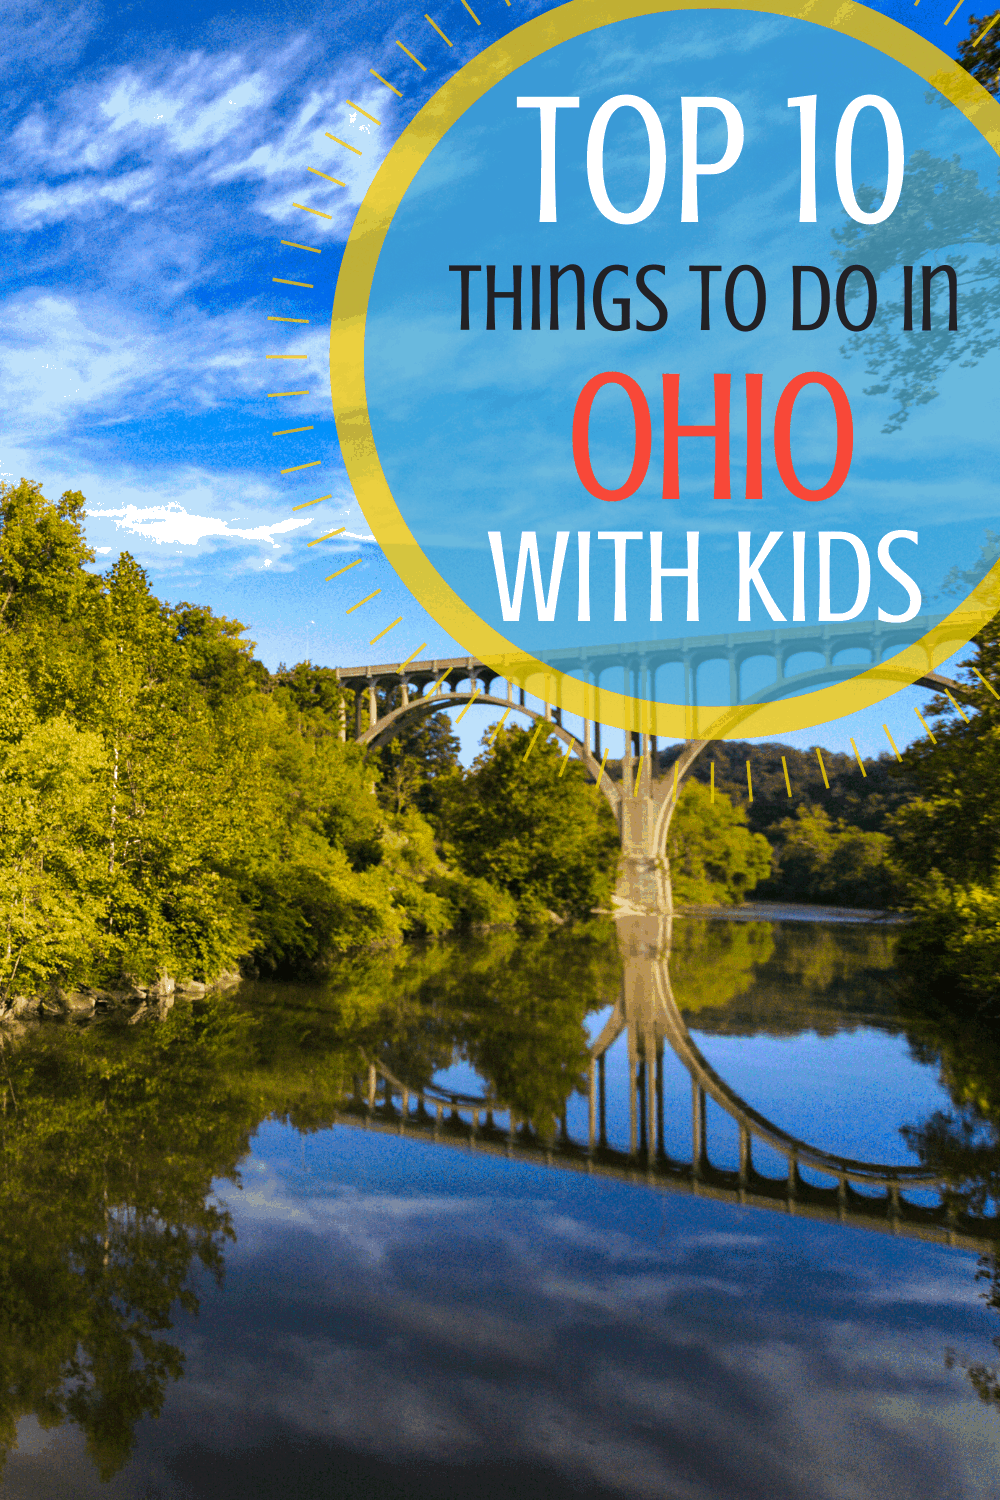 10 Fun Things to Do in Ohio with kids on an Ohio Vacation